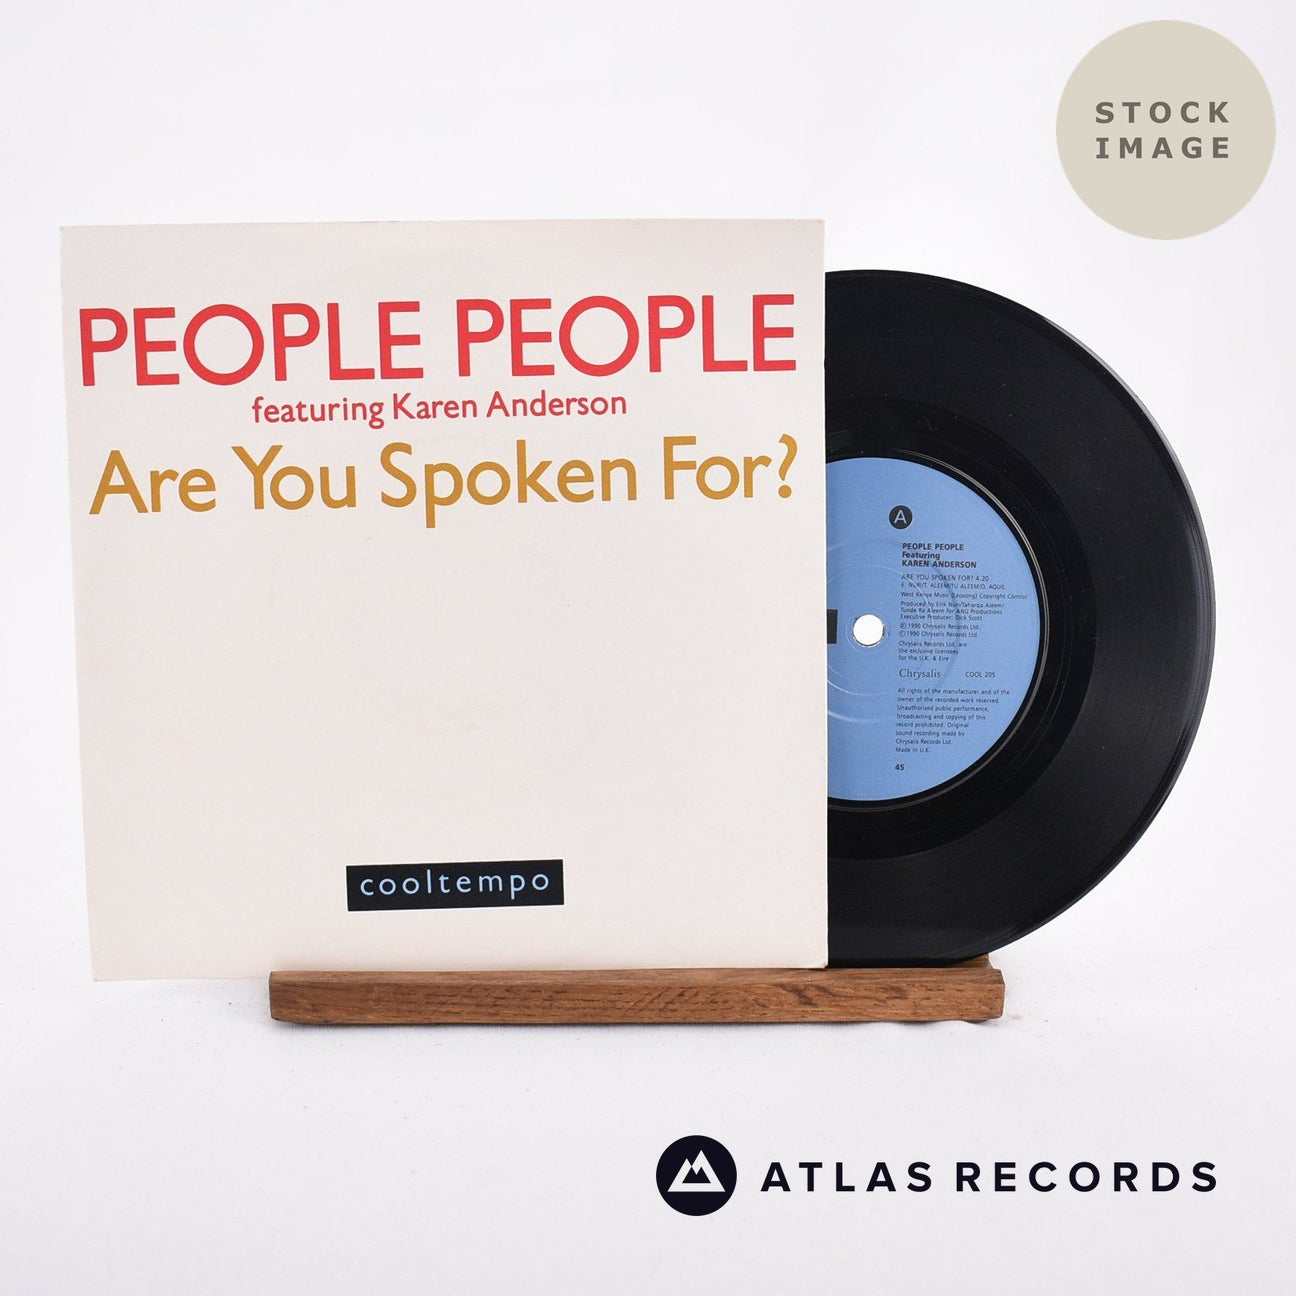 People People Are You Spoken For? Vinyl Record - Sleeve & Record Side-By-Side